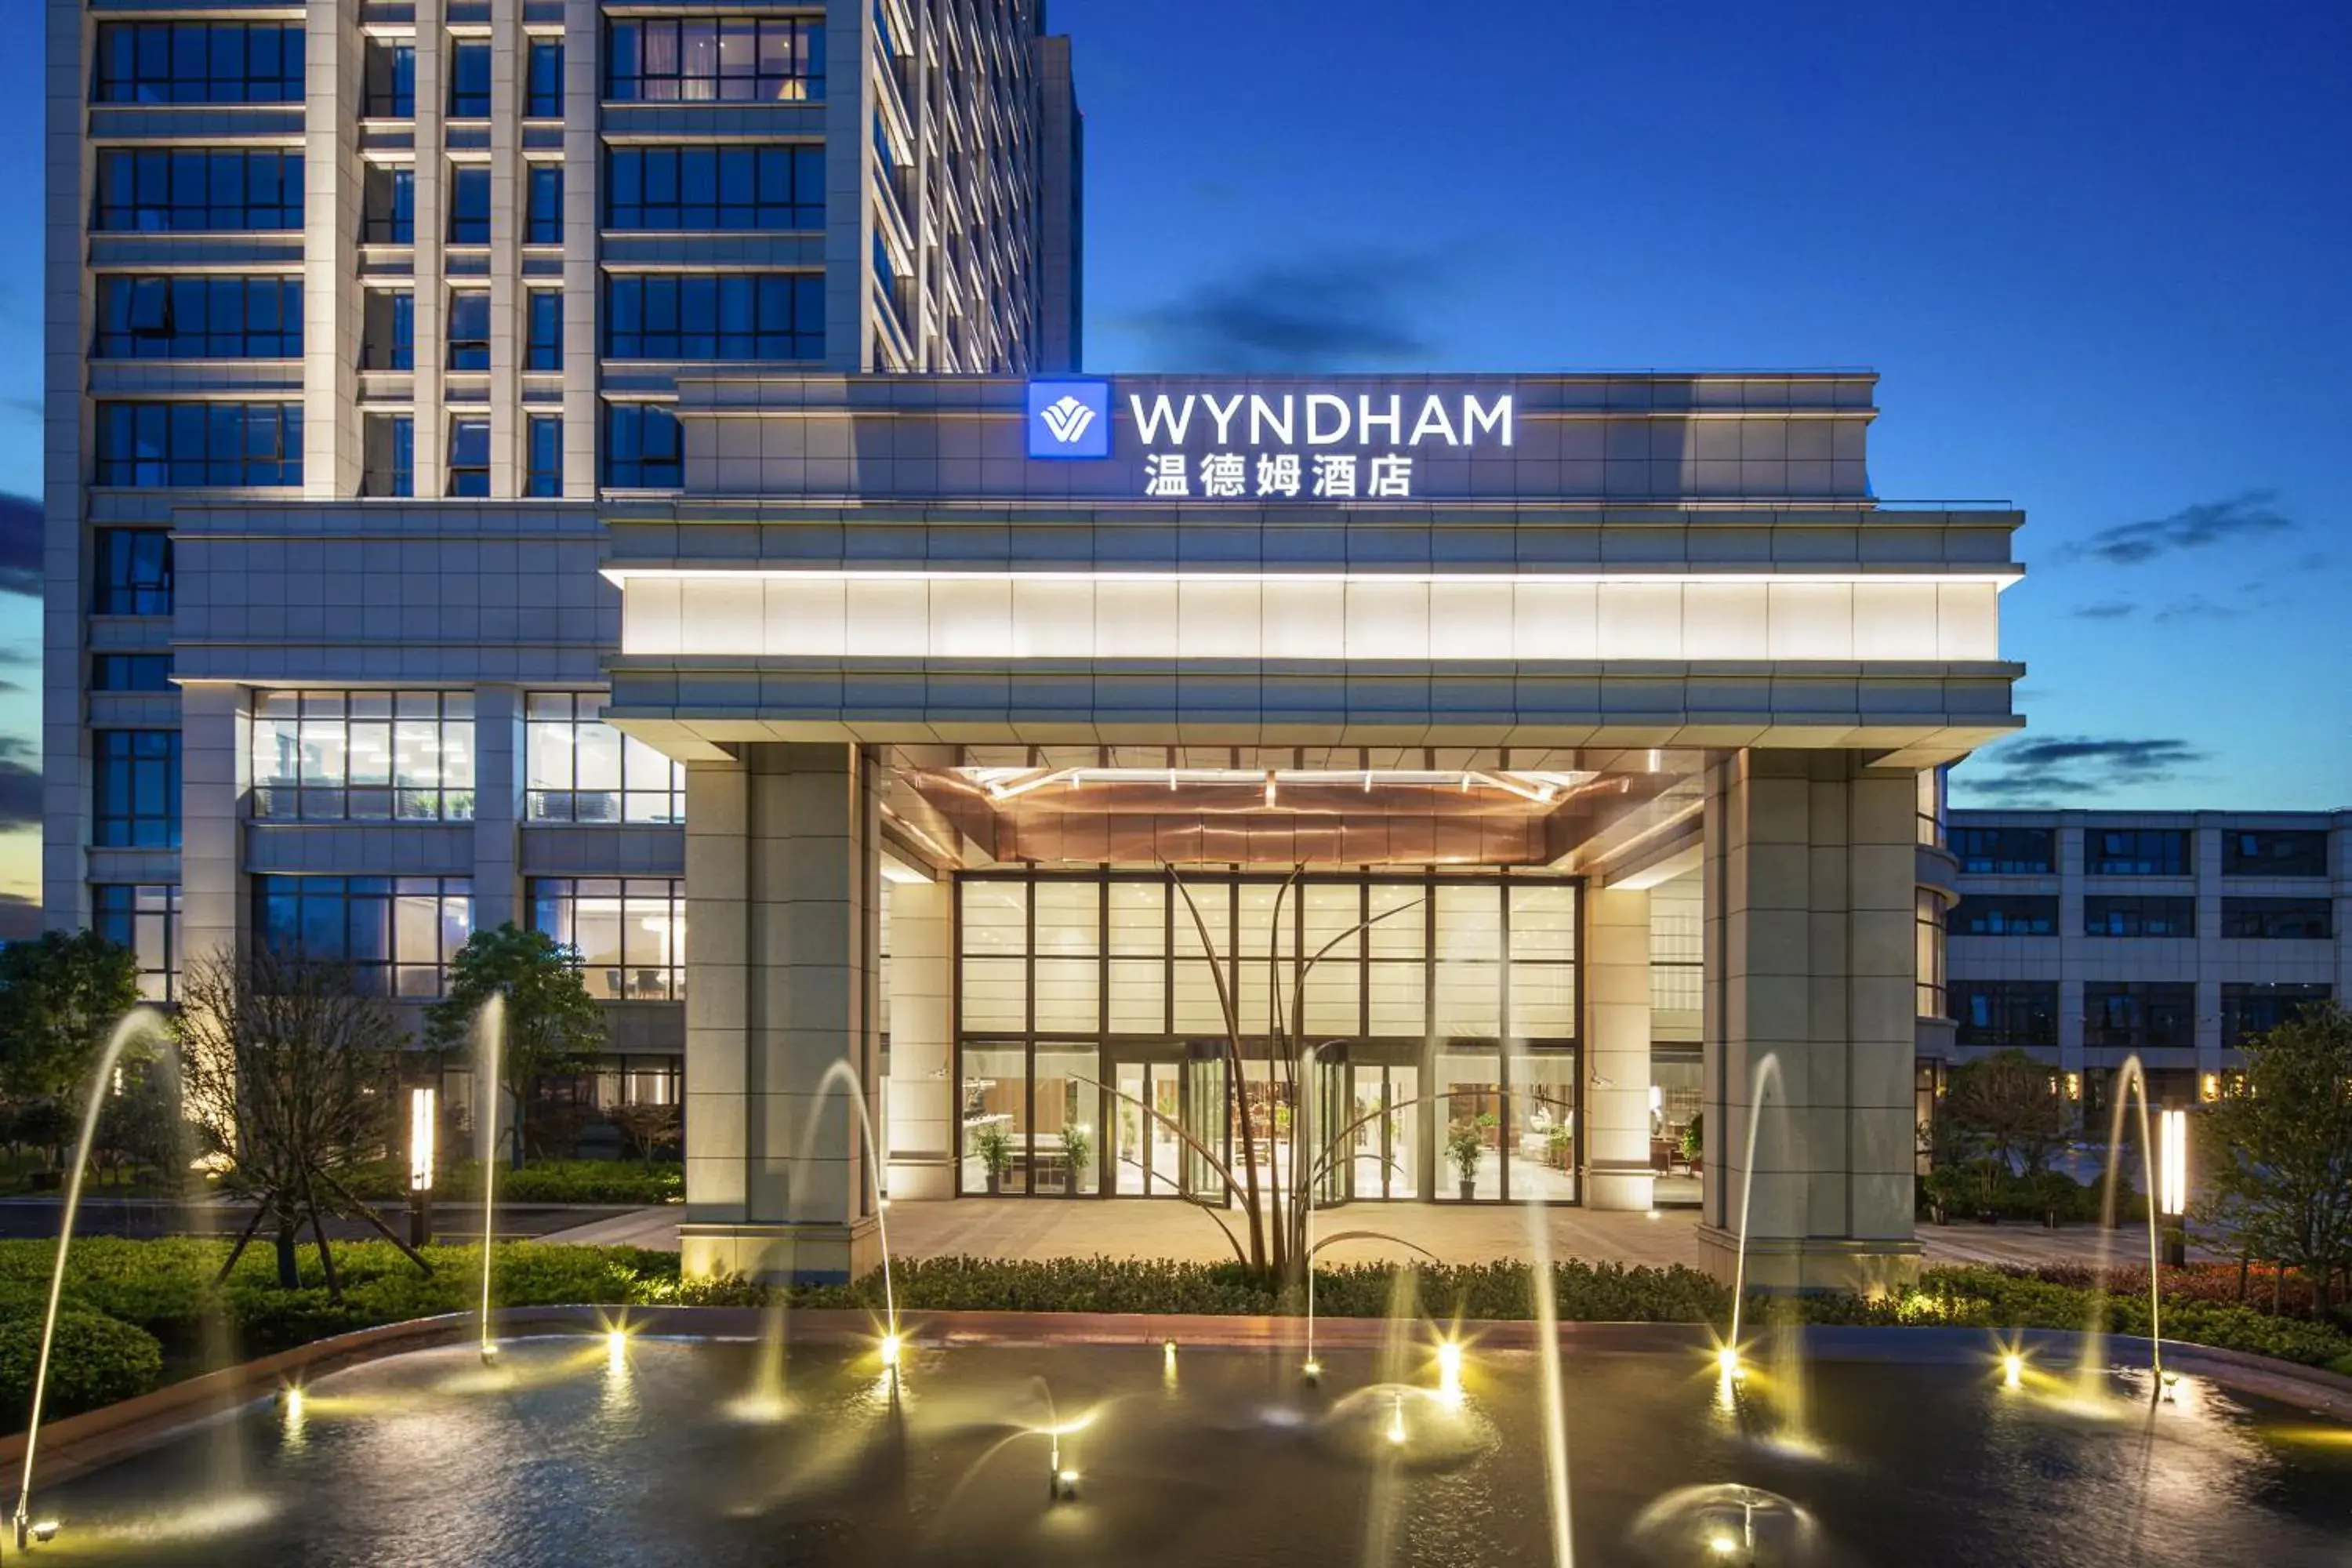 Property Building in Wyndham Shanghai Pudong